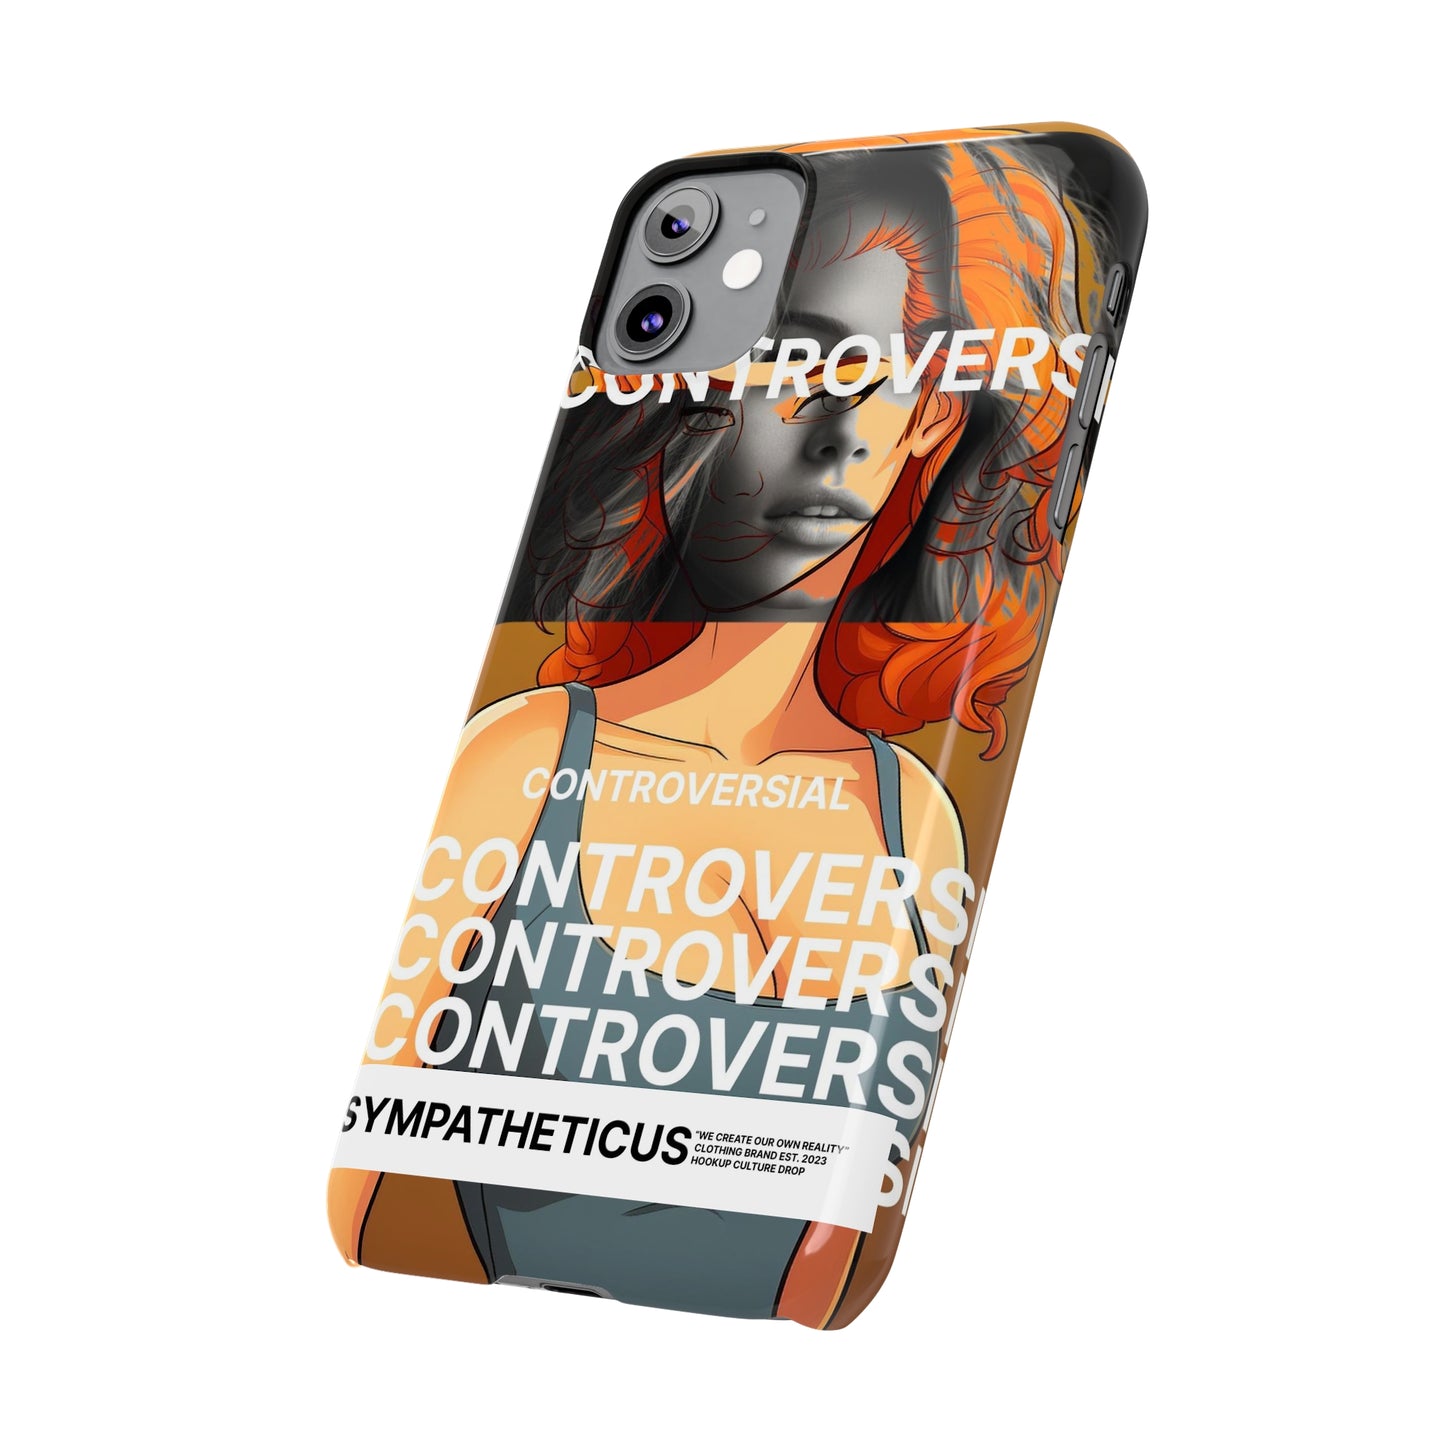 Hookup culture special iphone case-13